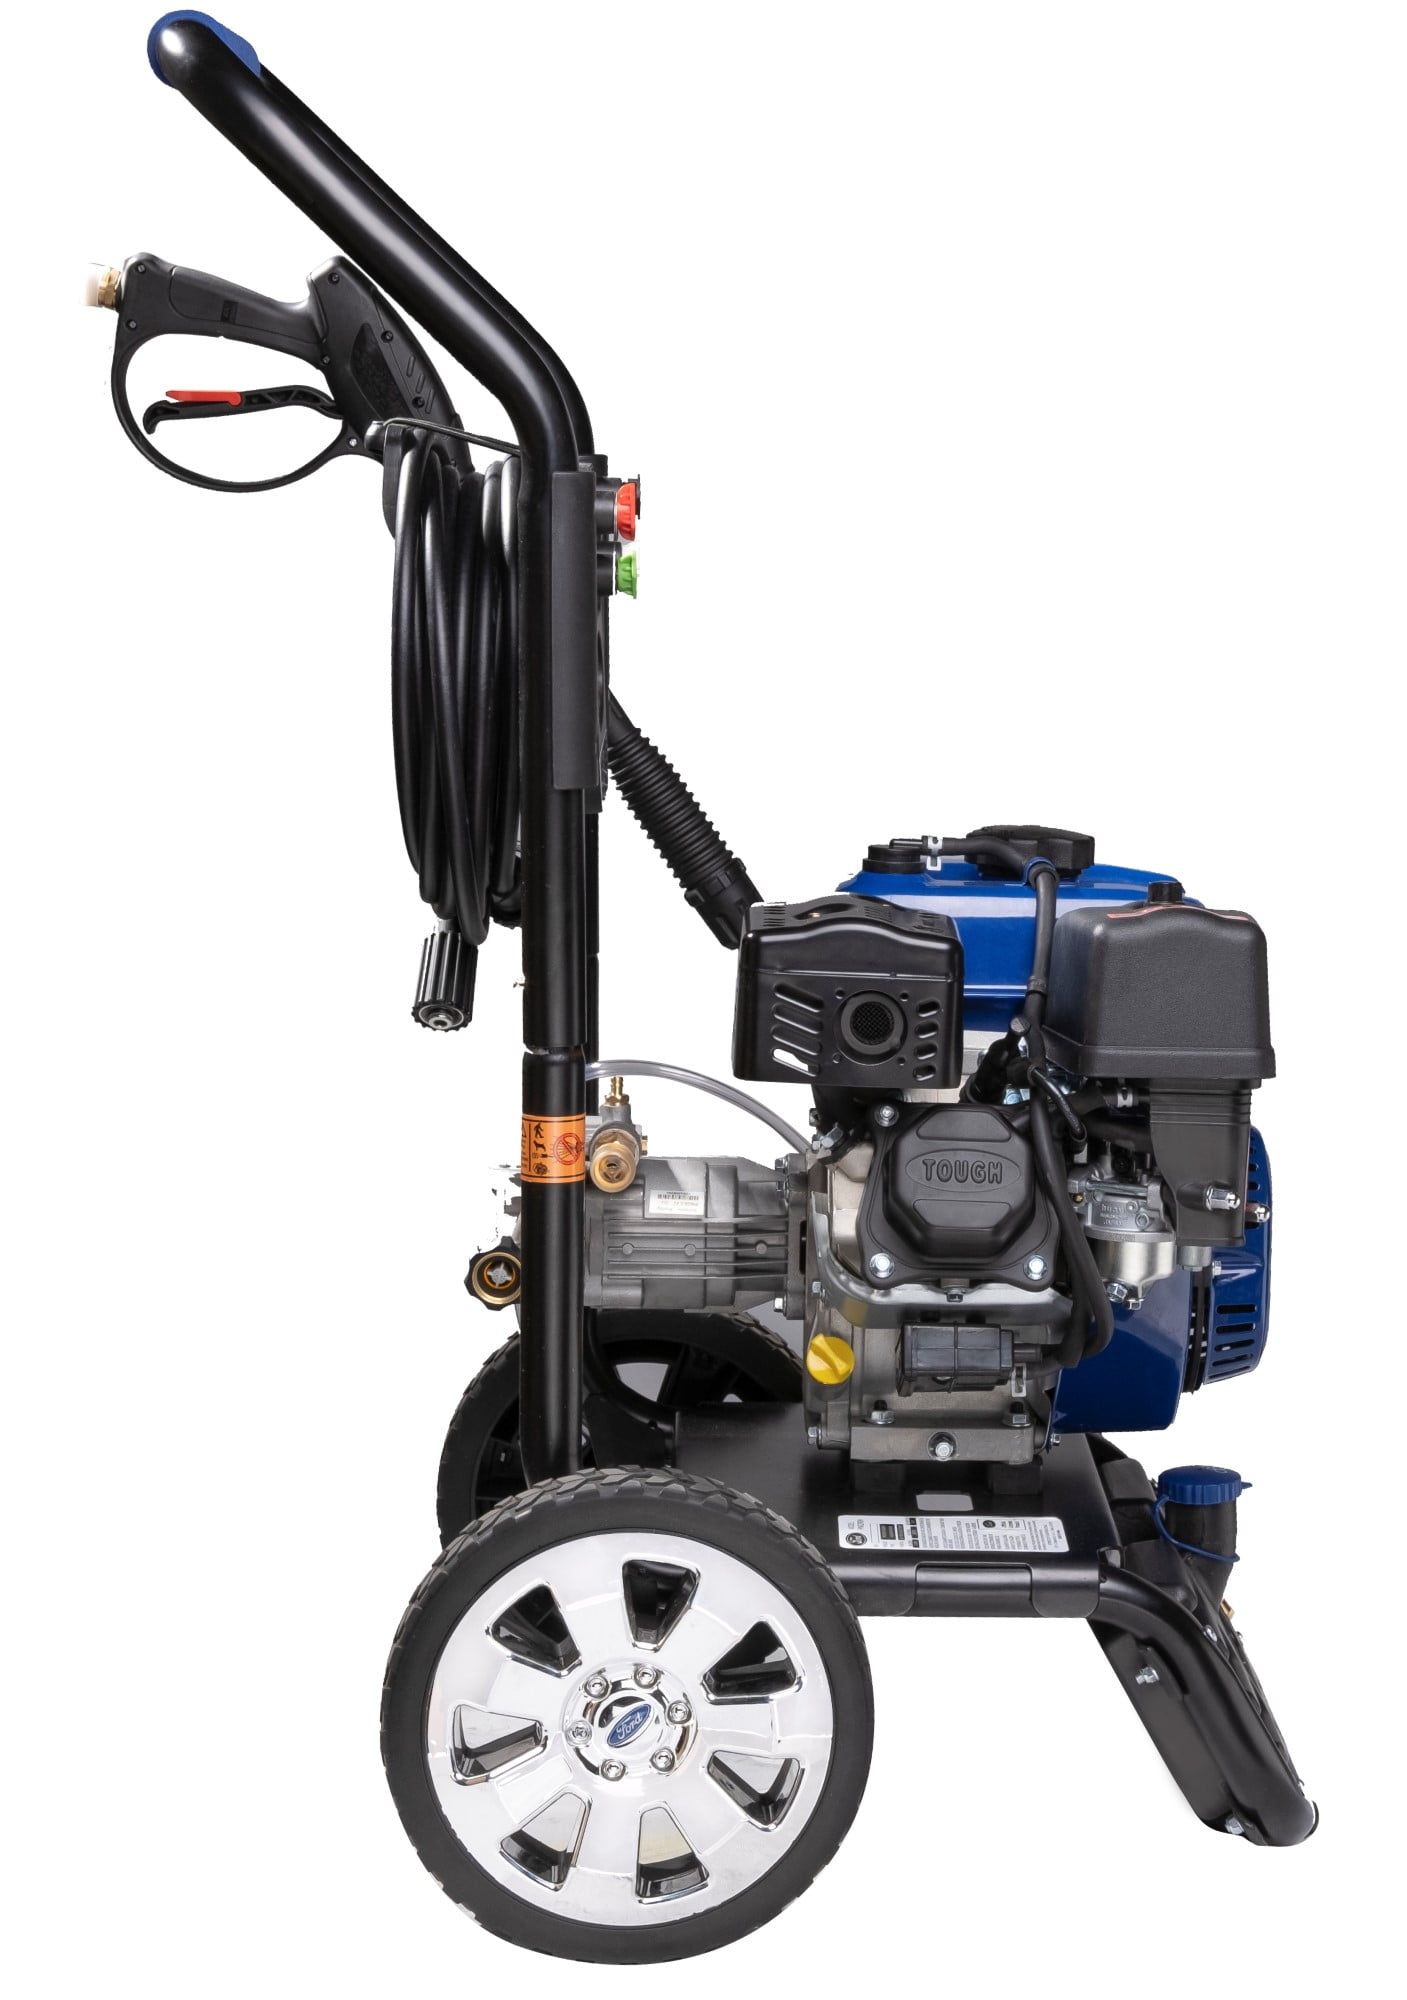 Ford FPWG2900H Gas Powered Pressure Washer - 2900 PSI and 2.5 GPM - CARB Compliant - 1